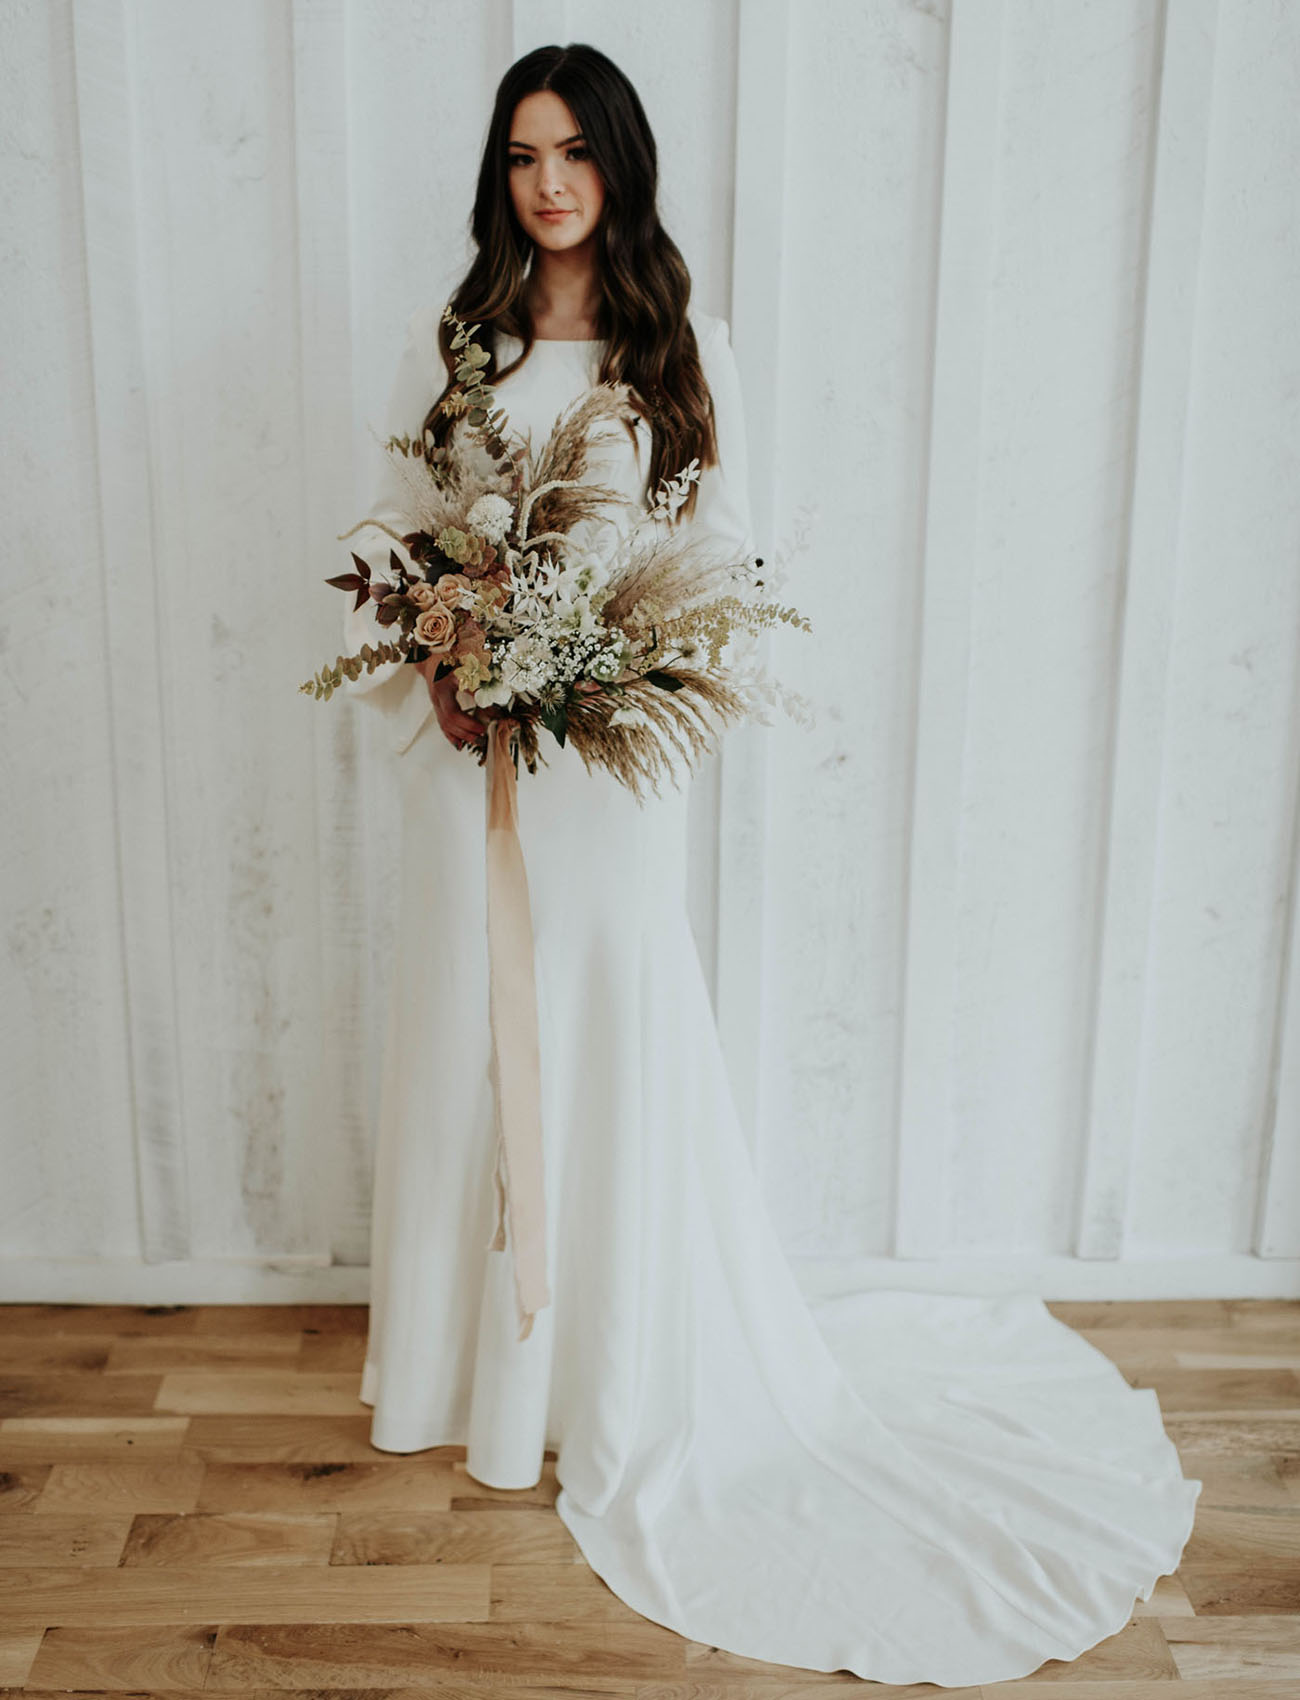 The bride was wearing a modern wedding dress with a high neckline, bell sleeves and a train